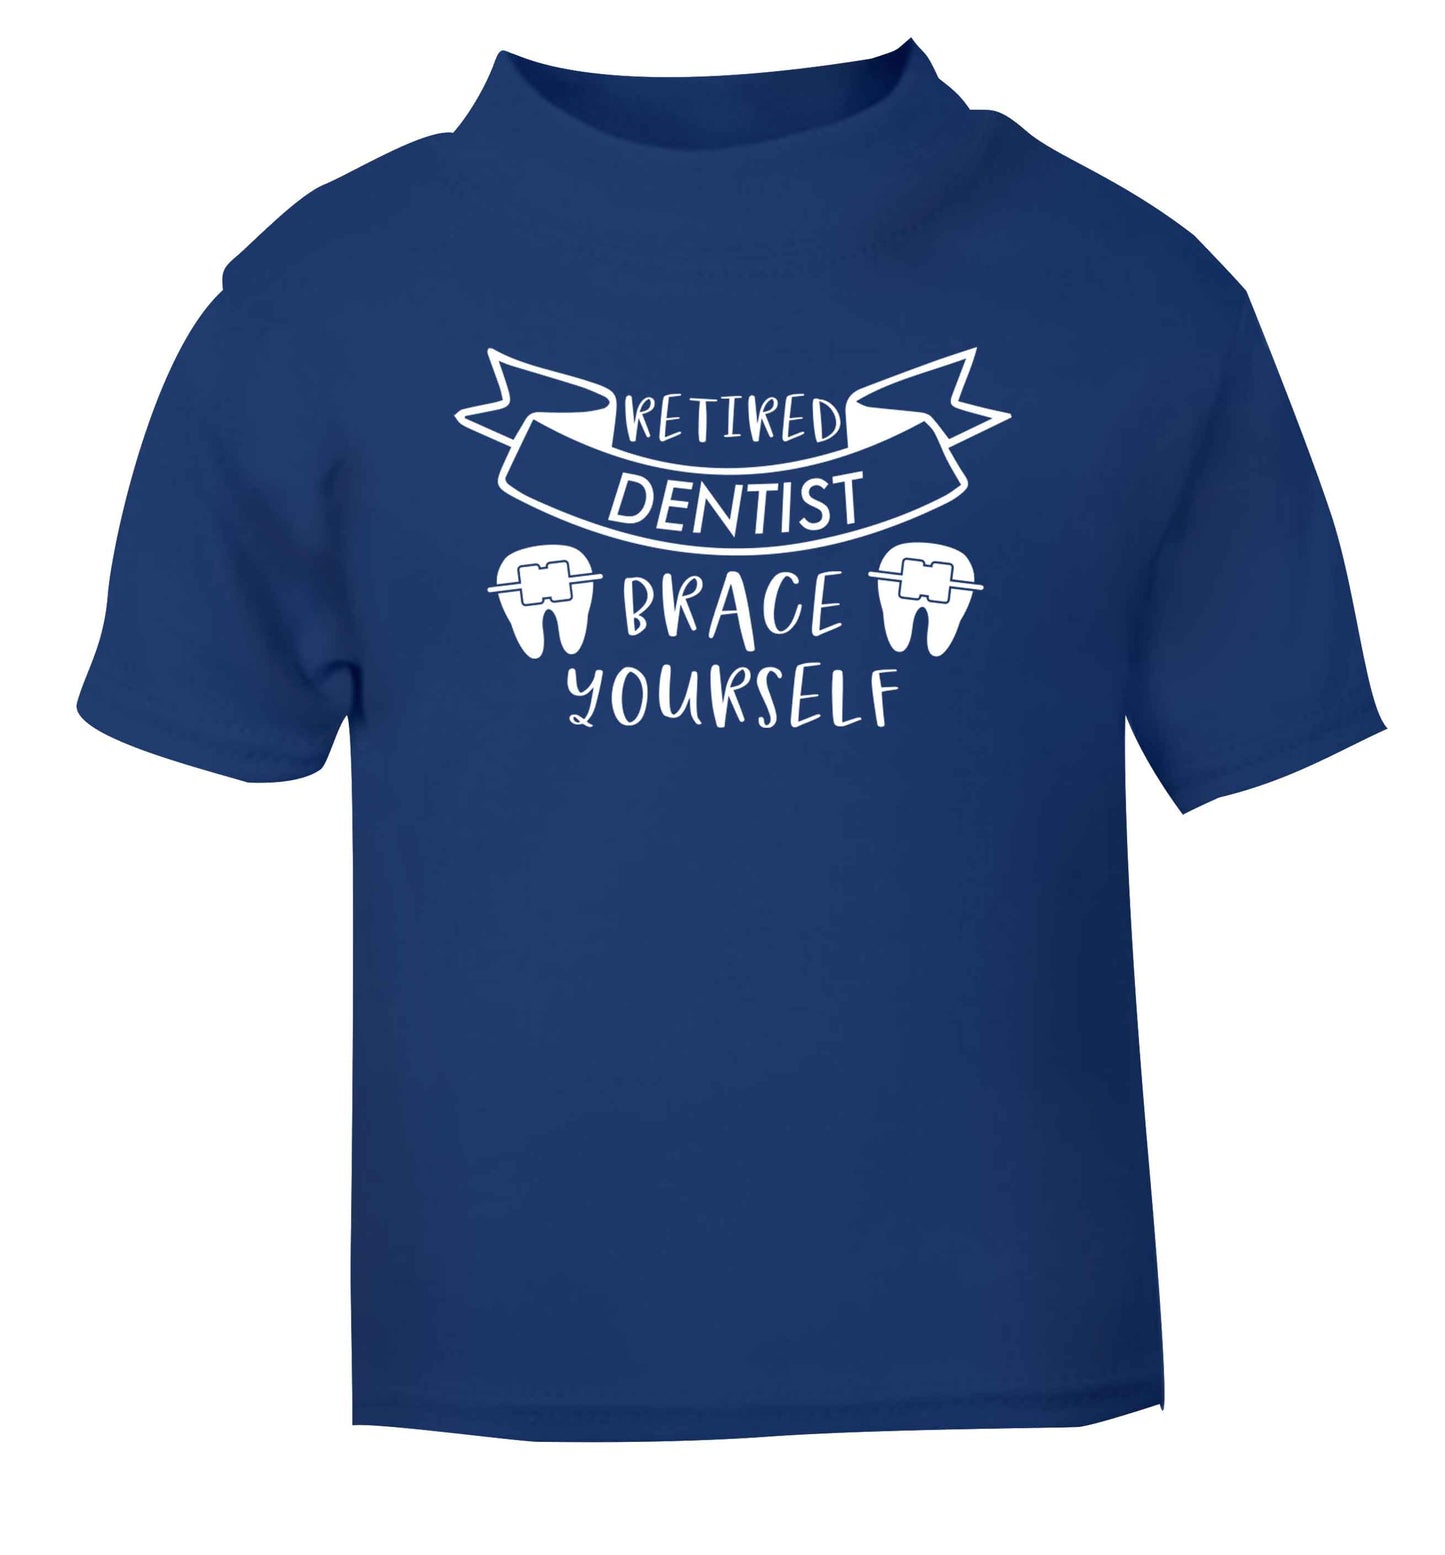 Retired dentist brace yourself blue Baby Toddler Tshirt 2 Years